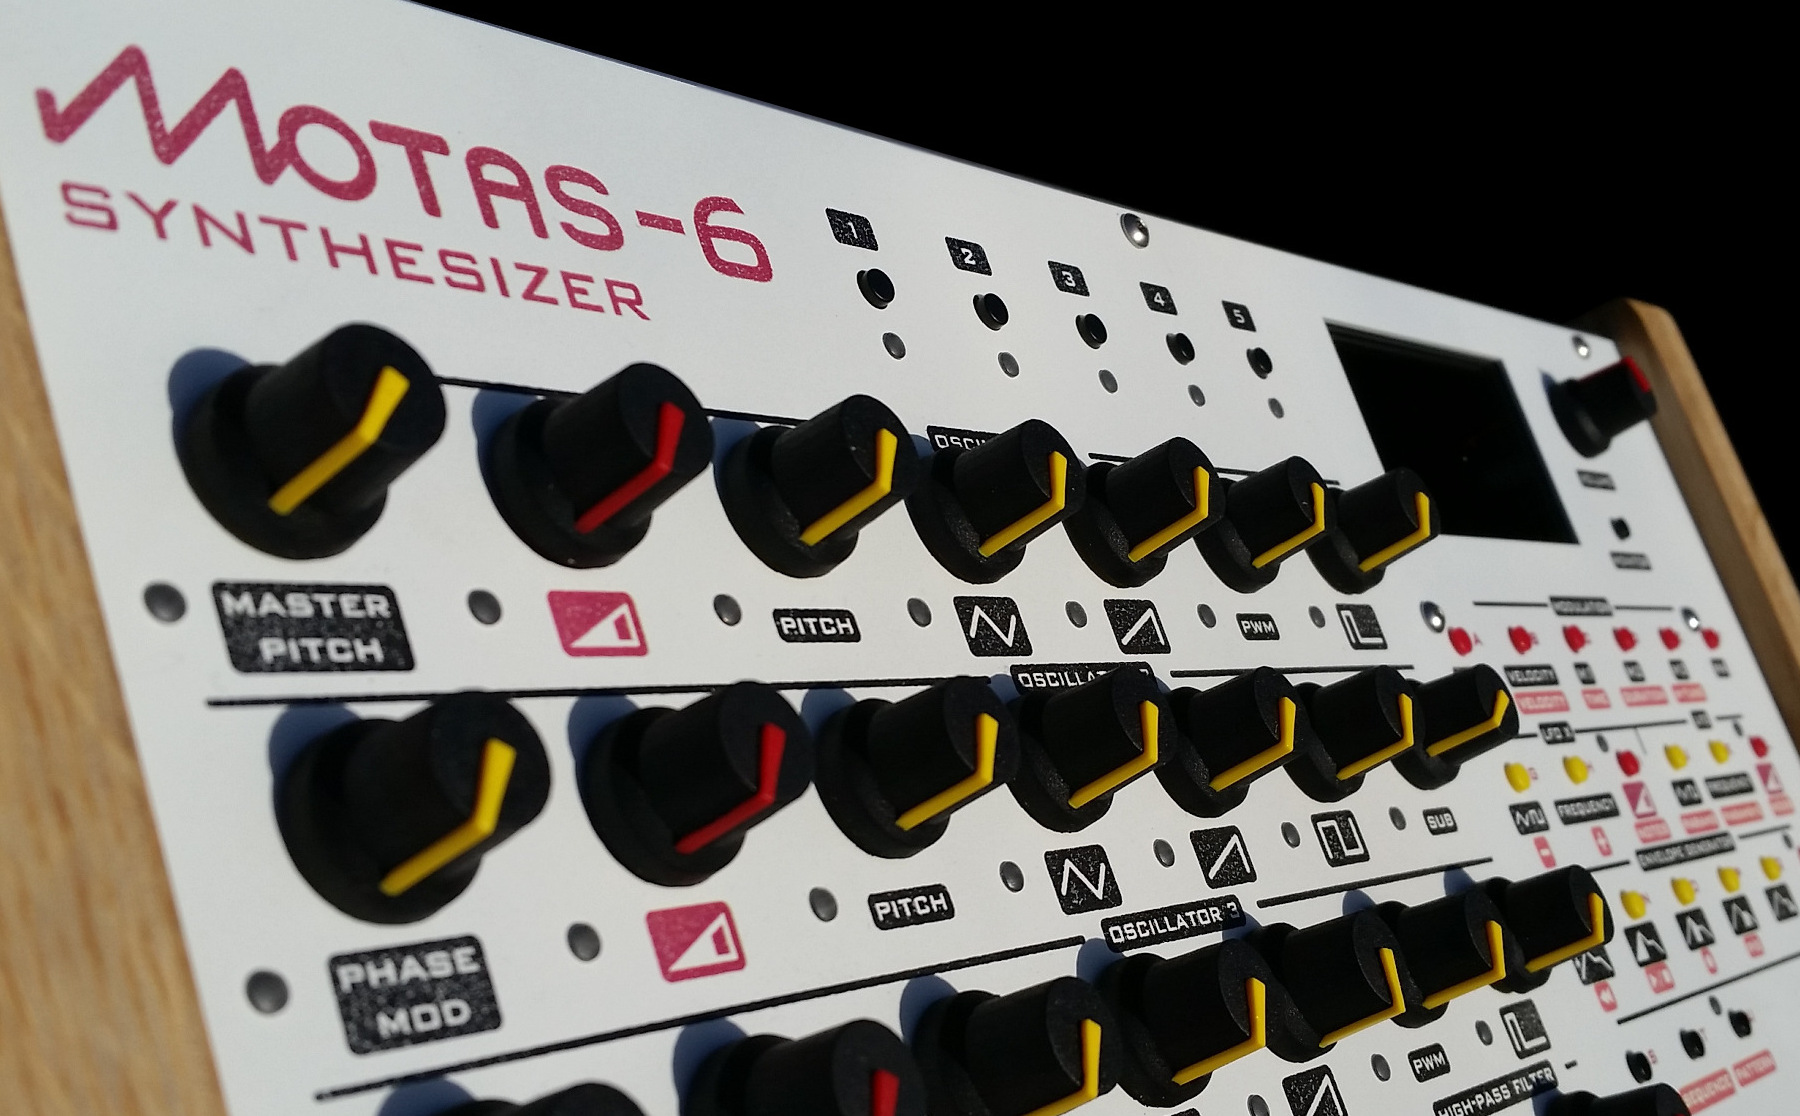 motas-6 synth with white panel finish